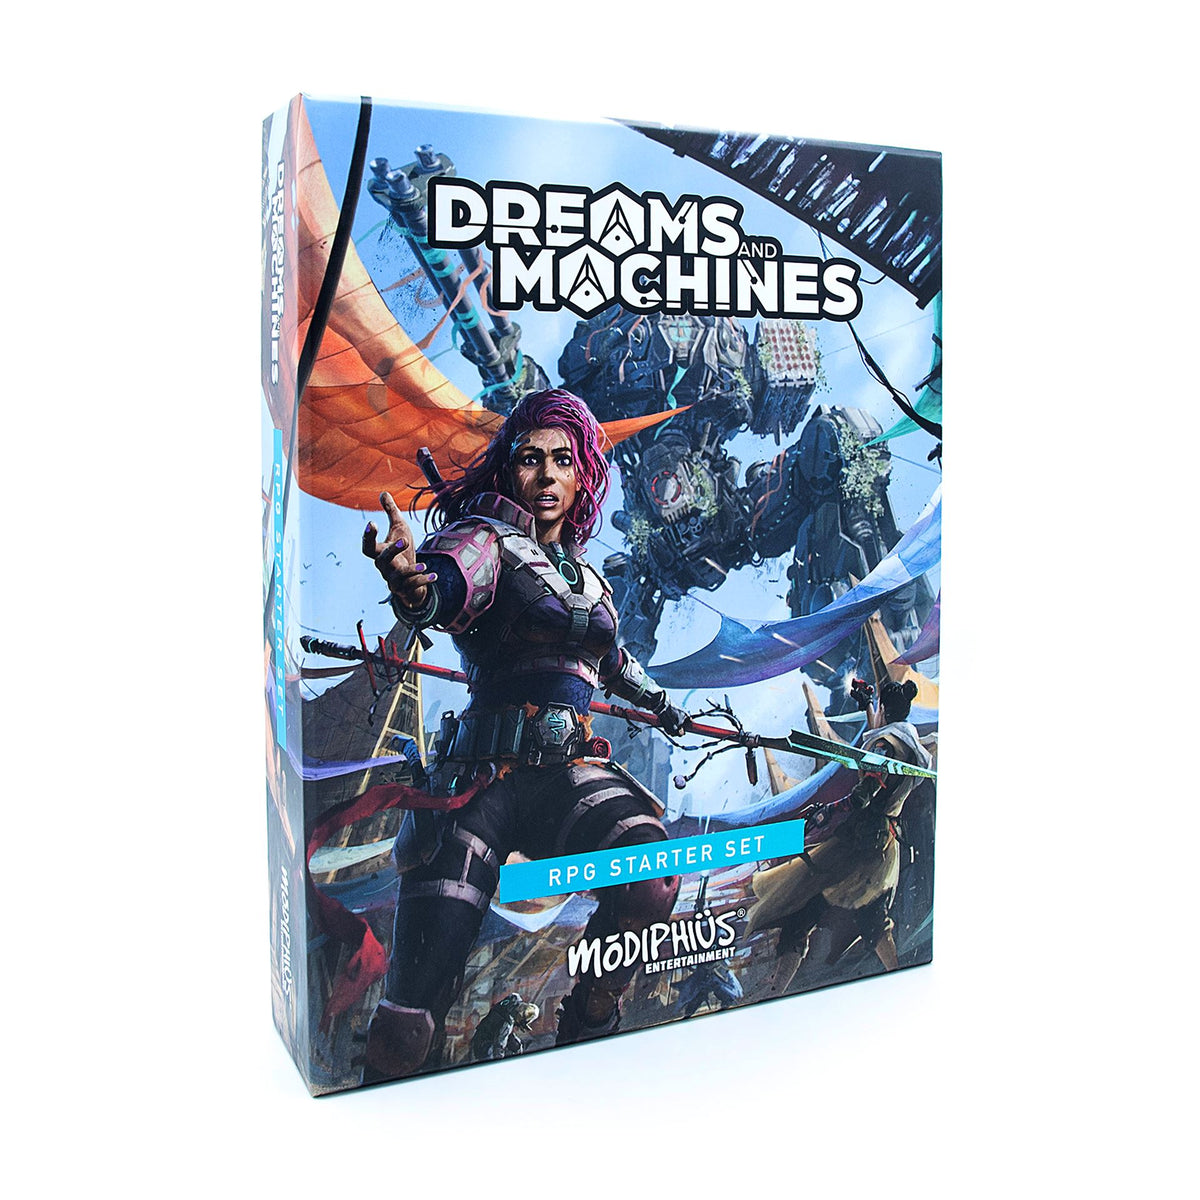 Dreams and Machines RPG Starter Set (T.O.S.) -  Modiphius Entertainment